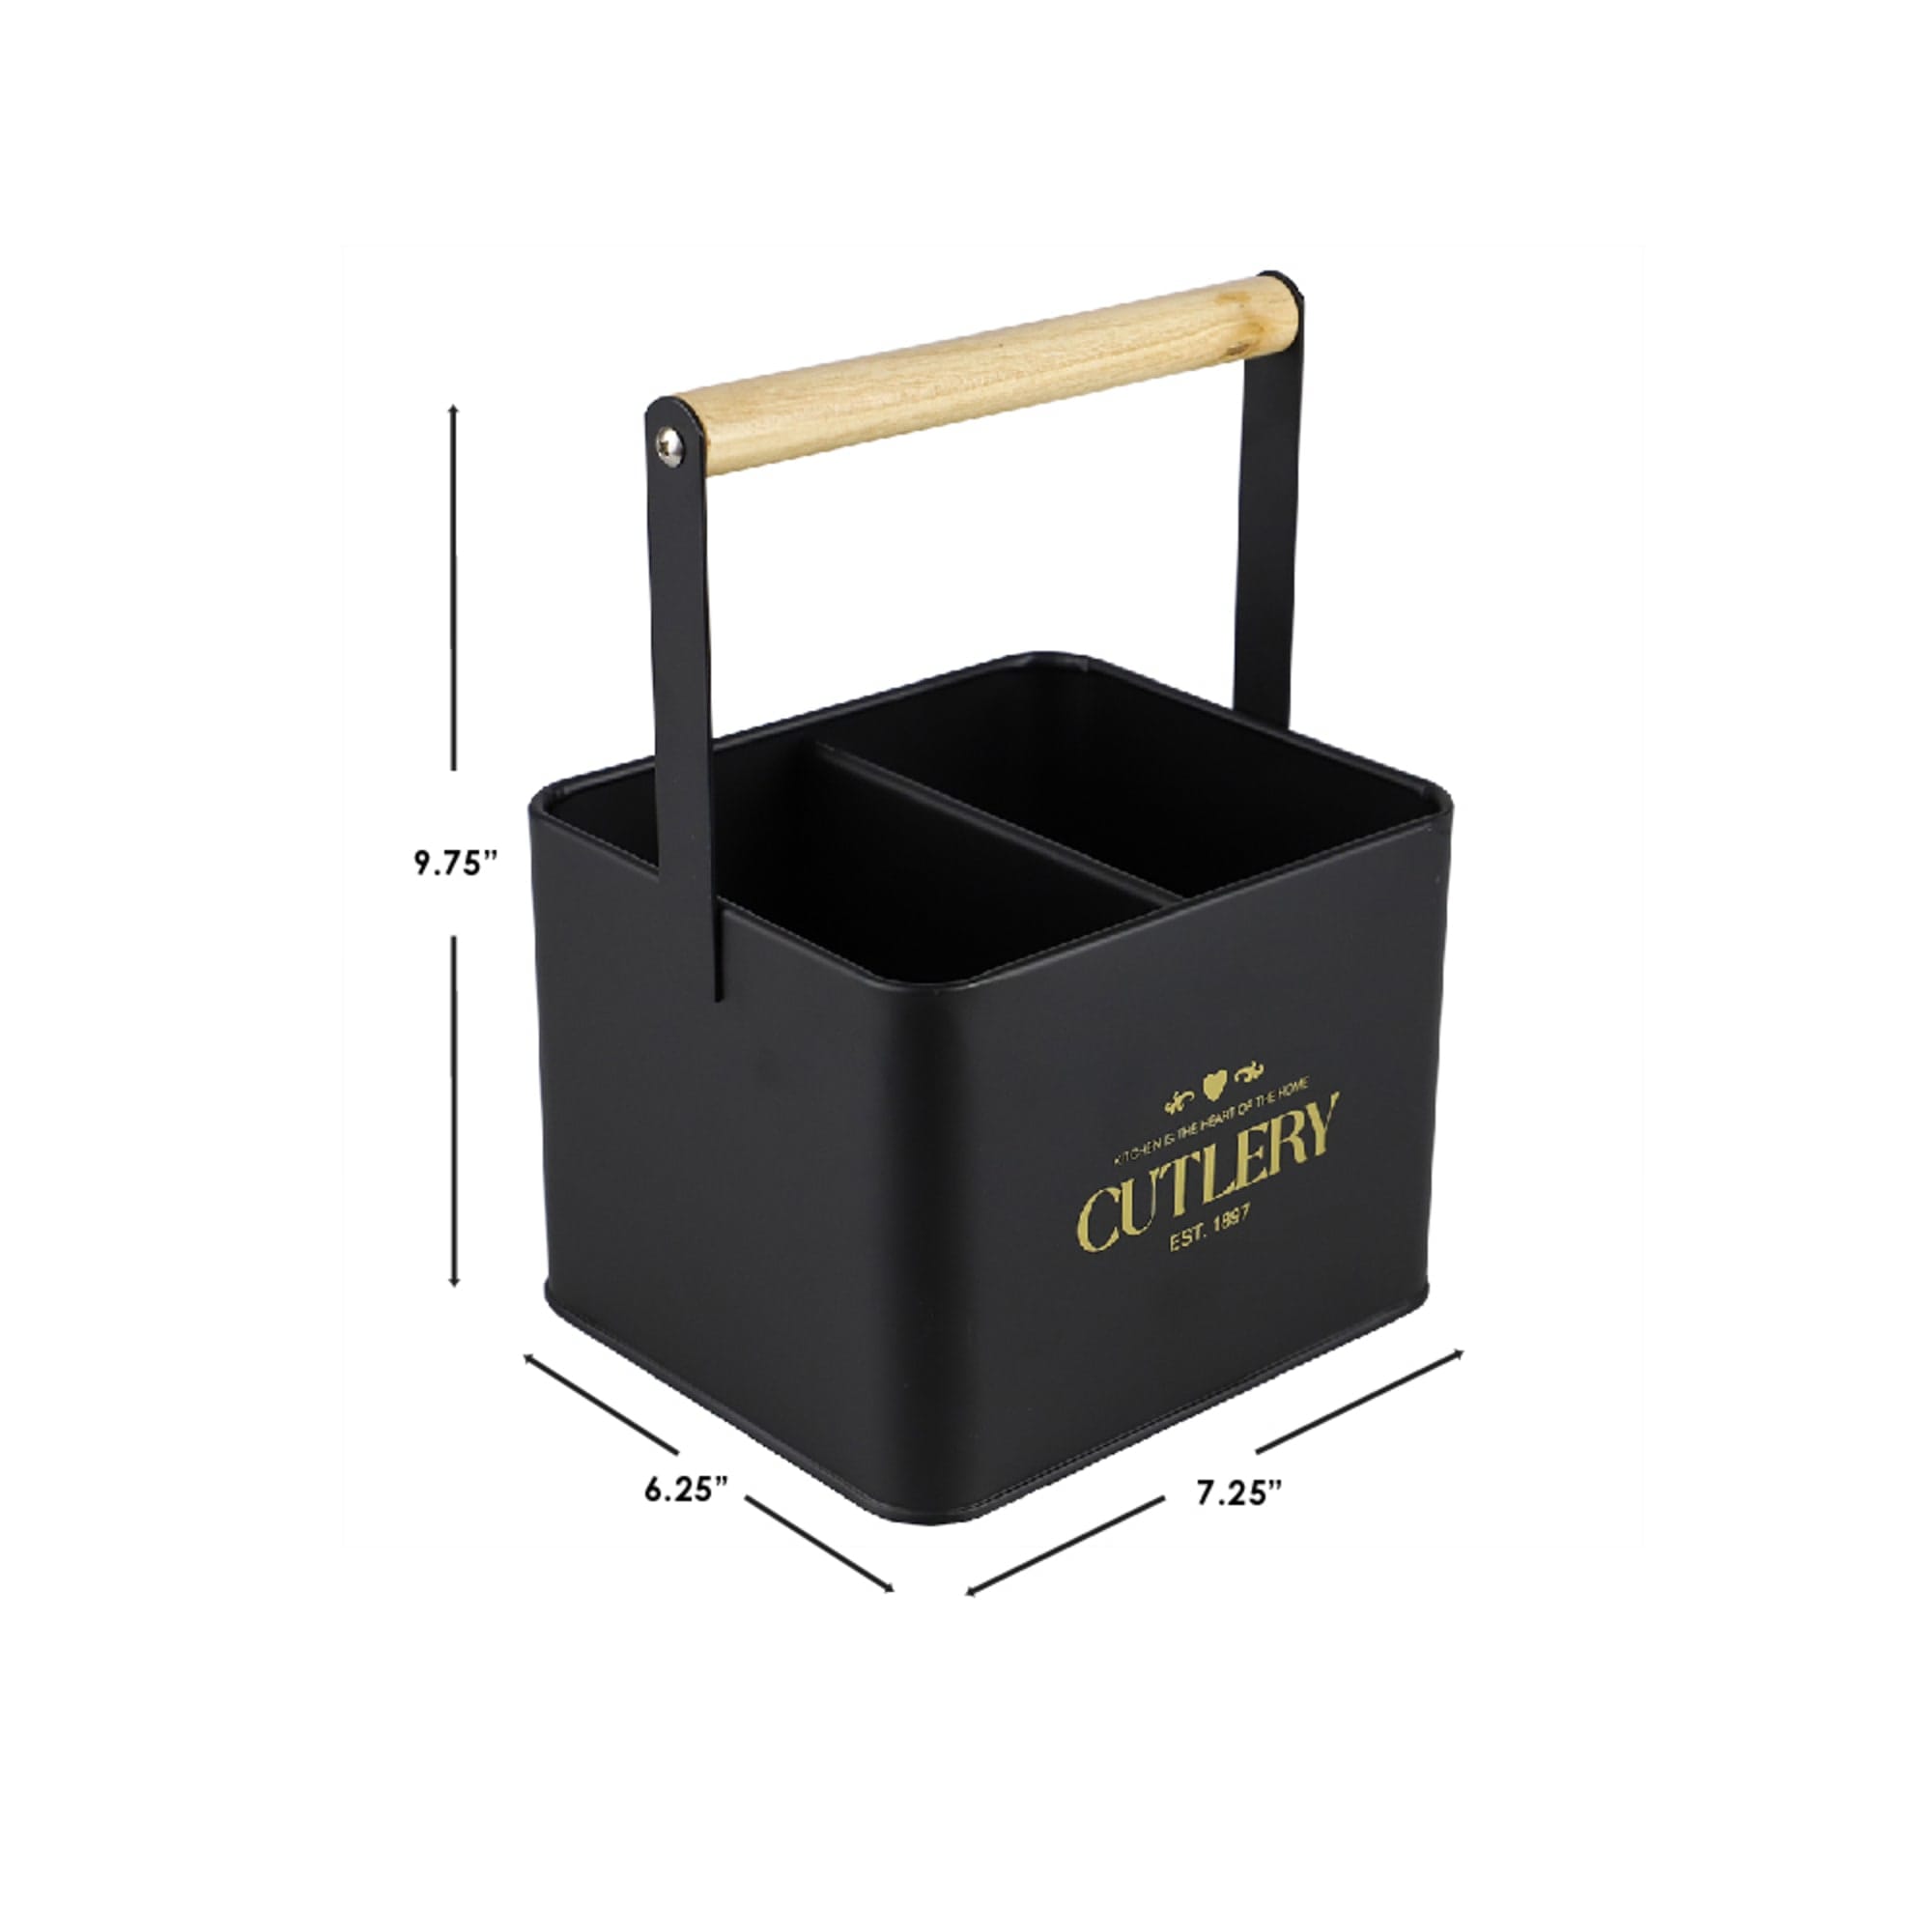 Home Basics Bistro Sectioned Tin Holder with Bamboo Handle, Black $8.00 EACH, CASE PACK OF 6